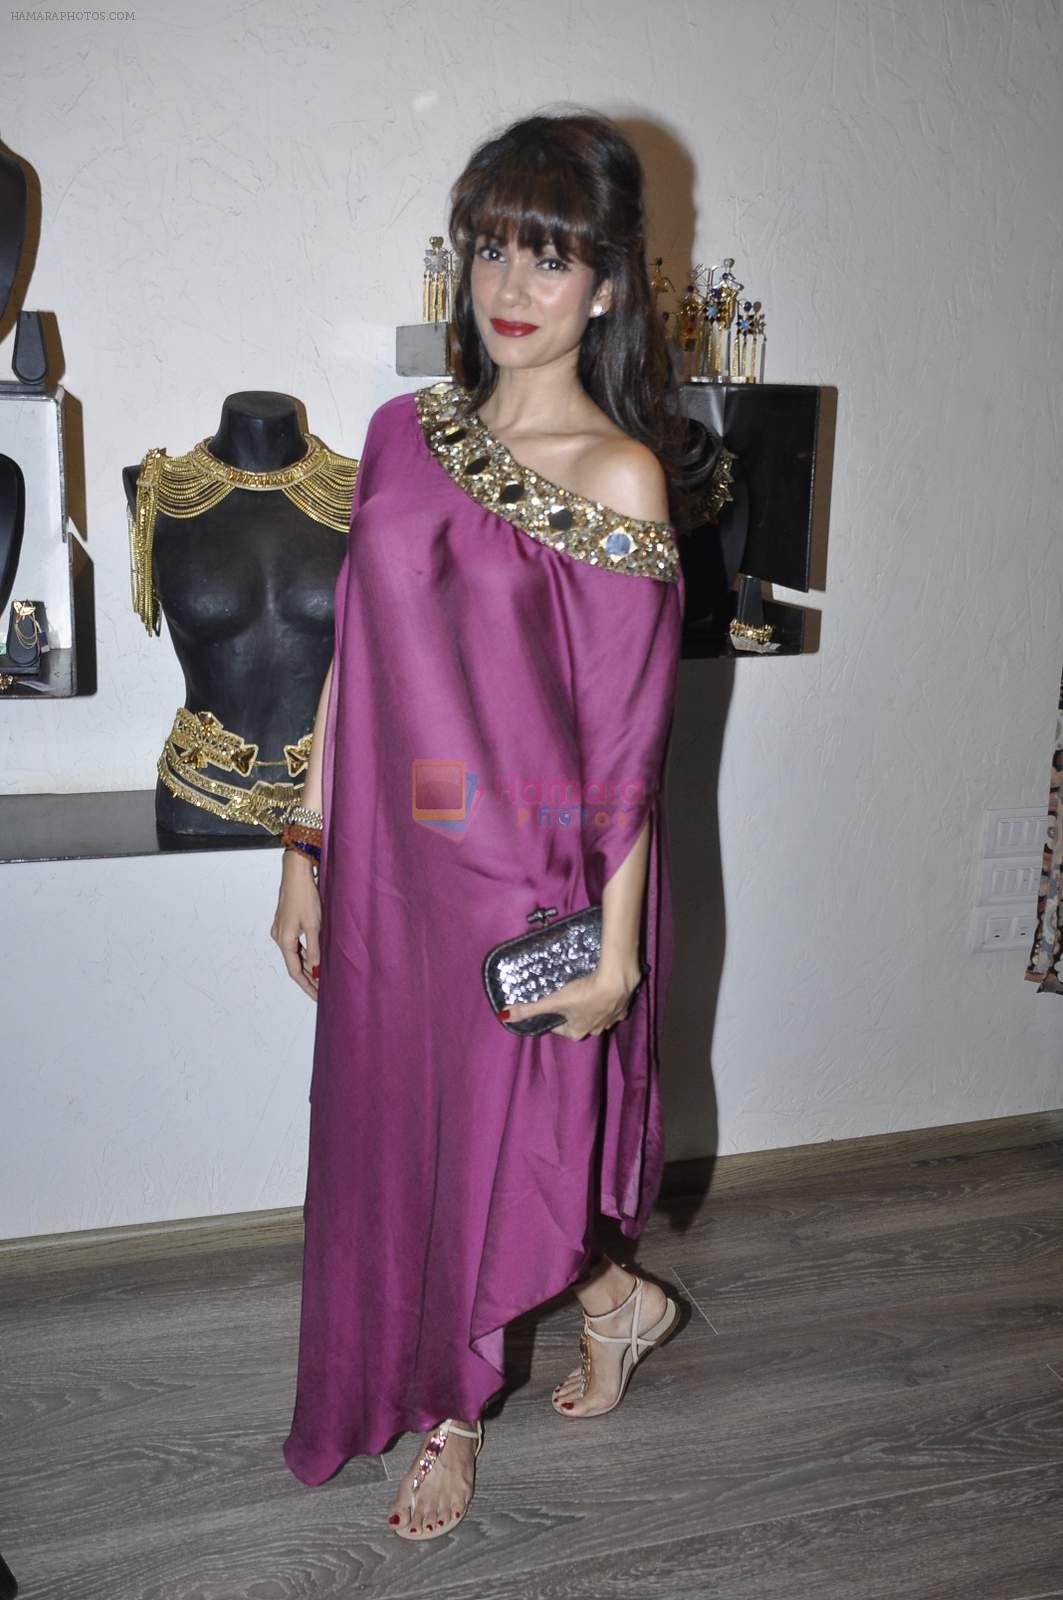 Vidya Malvade at Atosa launches new collection on 2nd Dec 2015